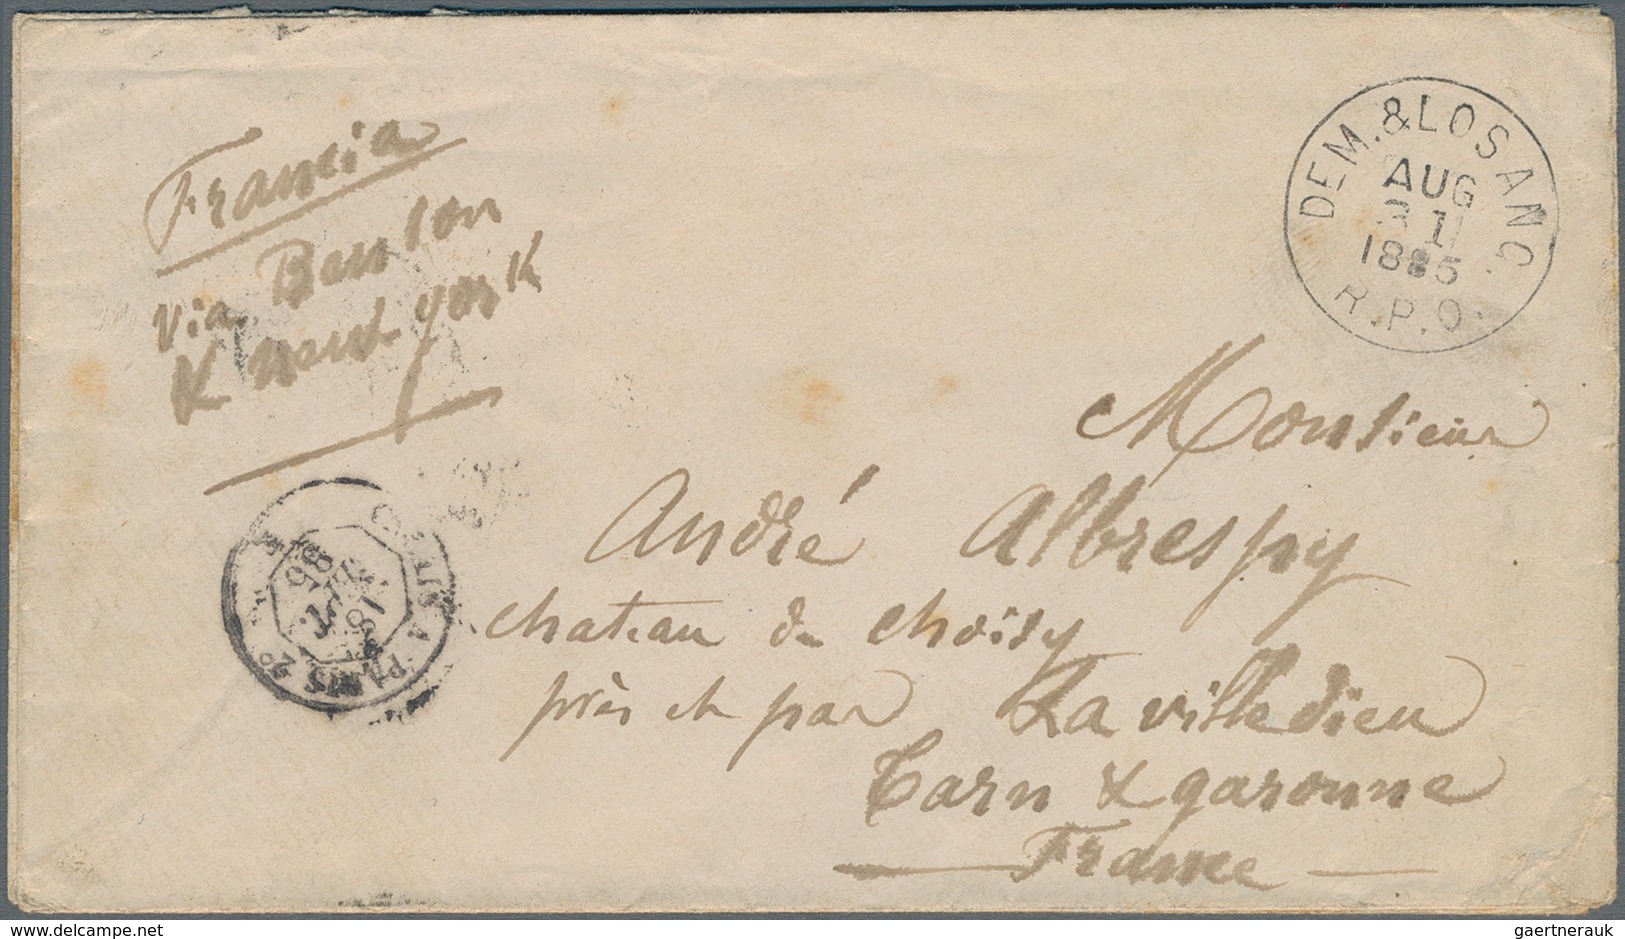 Mexiko - Ganzsachen: 1885 WELLS FARGO: Postal Stationery Envelope 15c. With Mexican Stamp 12c. Used - Mexico